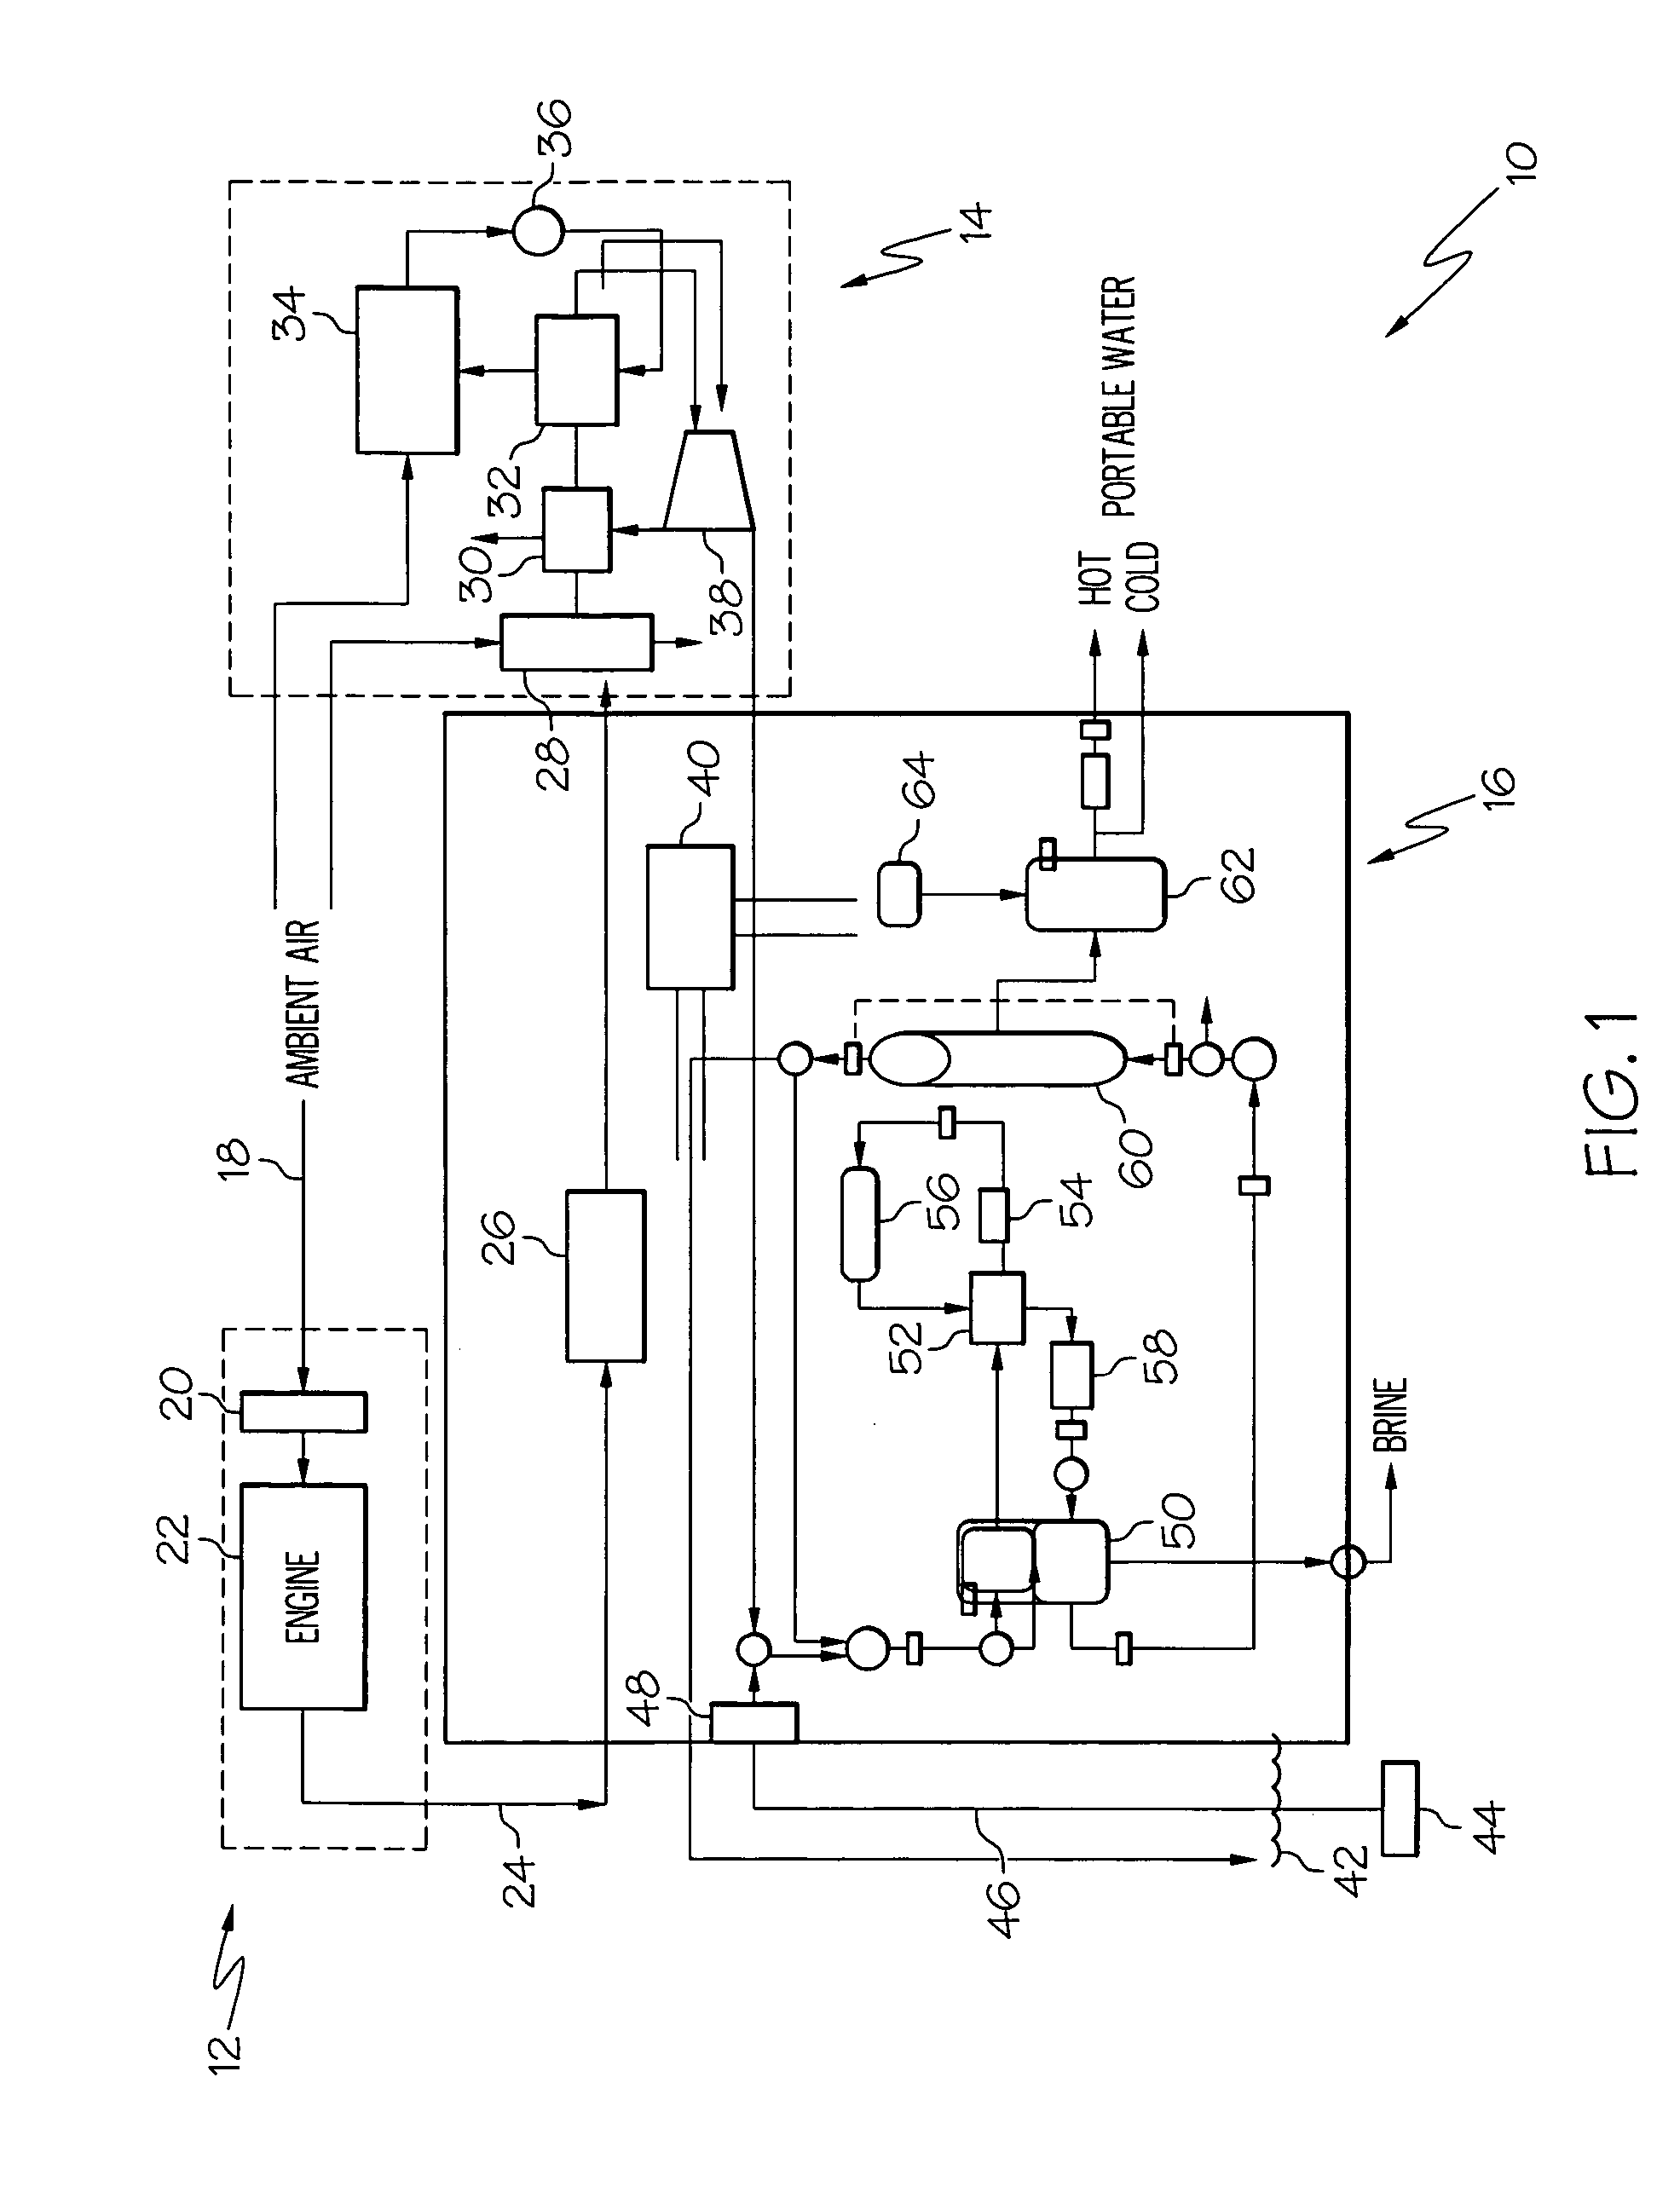 Water purification system and modes of operation